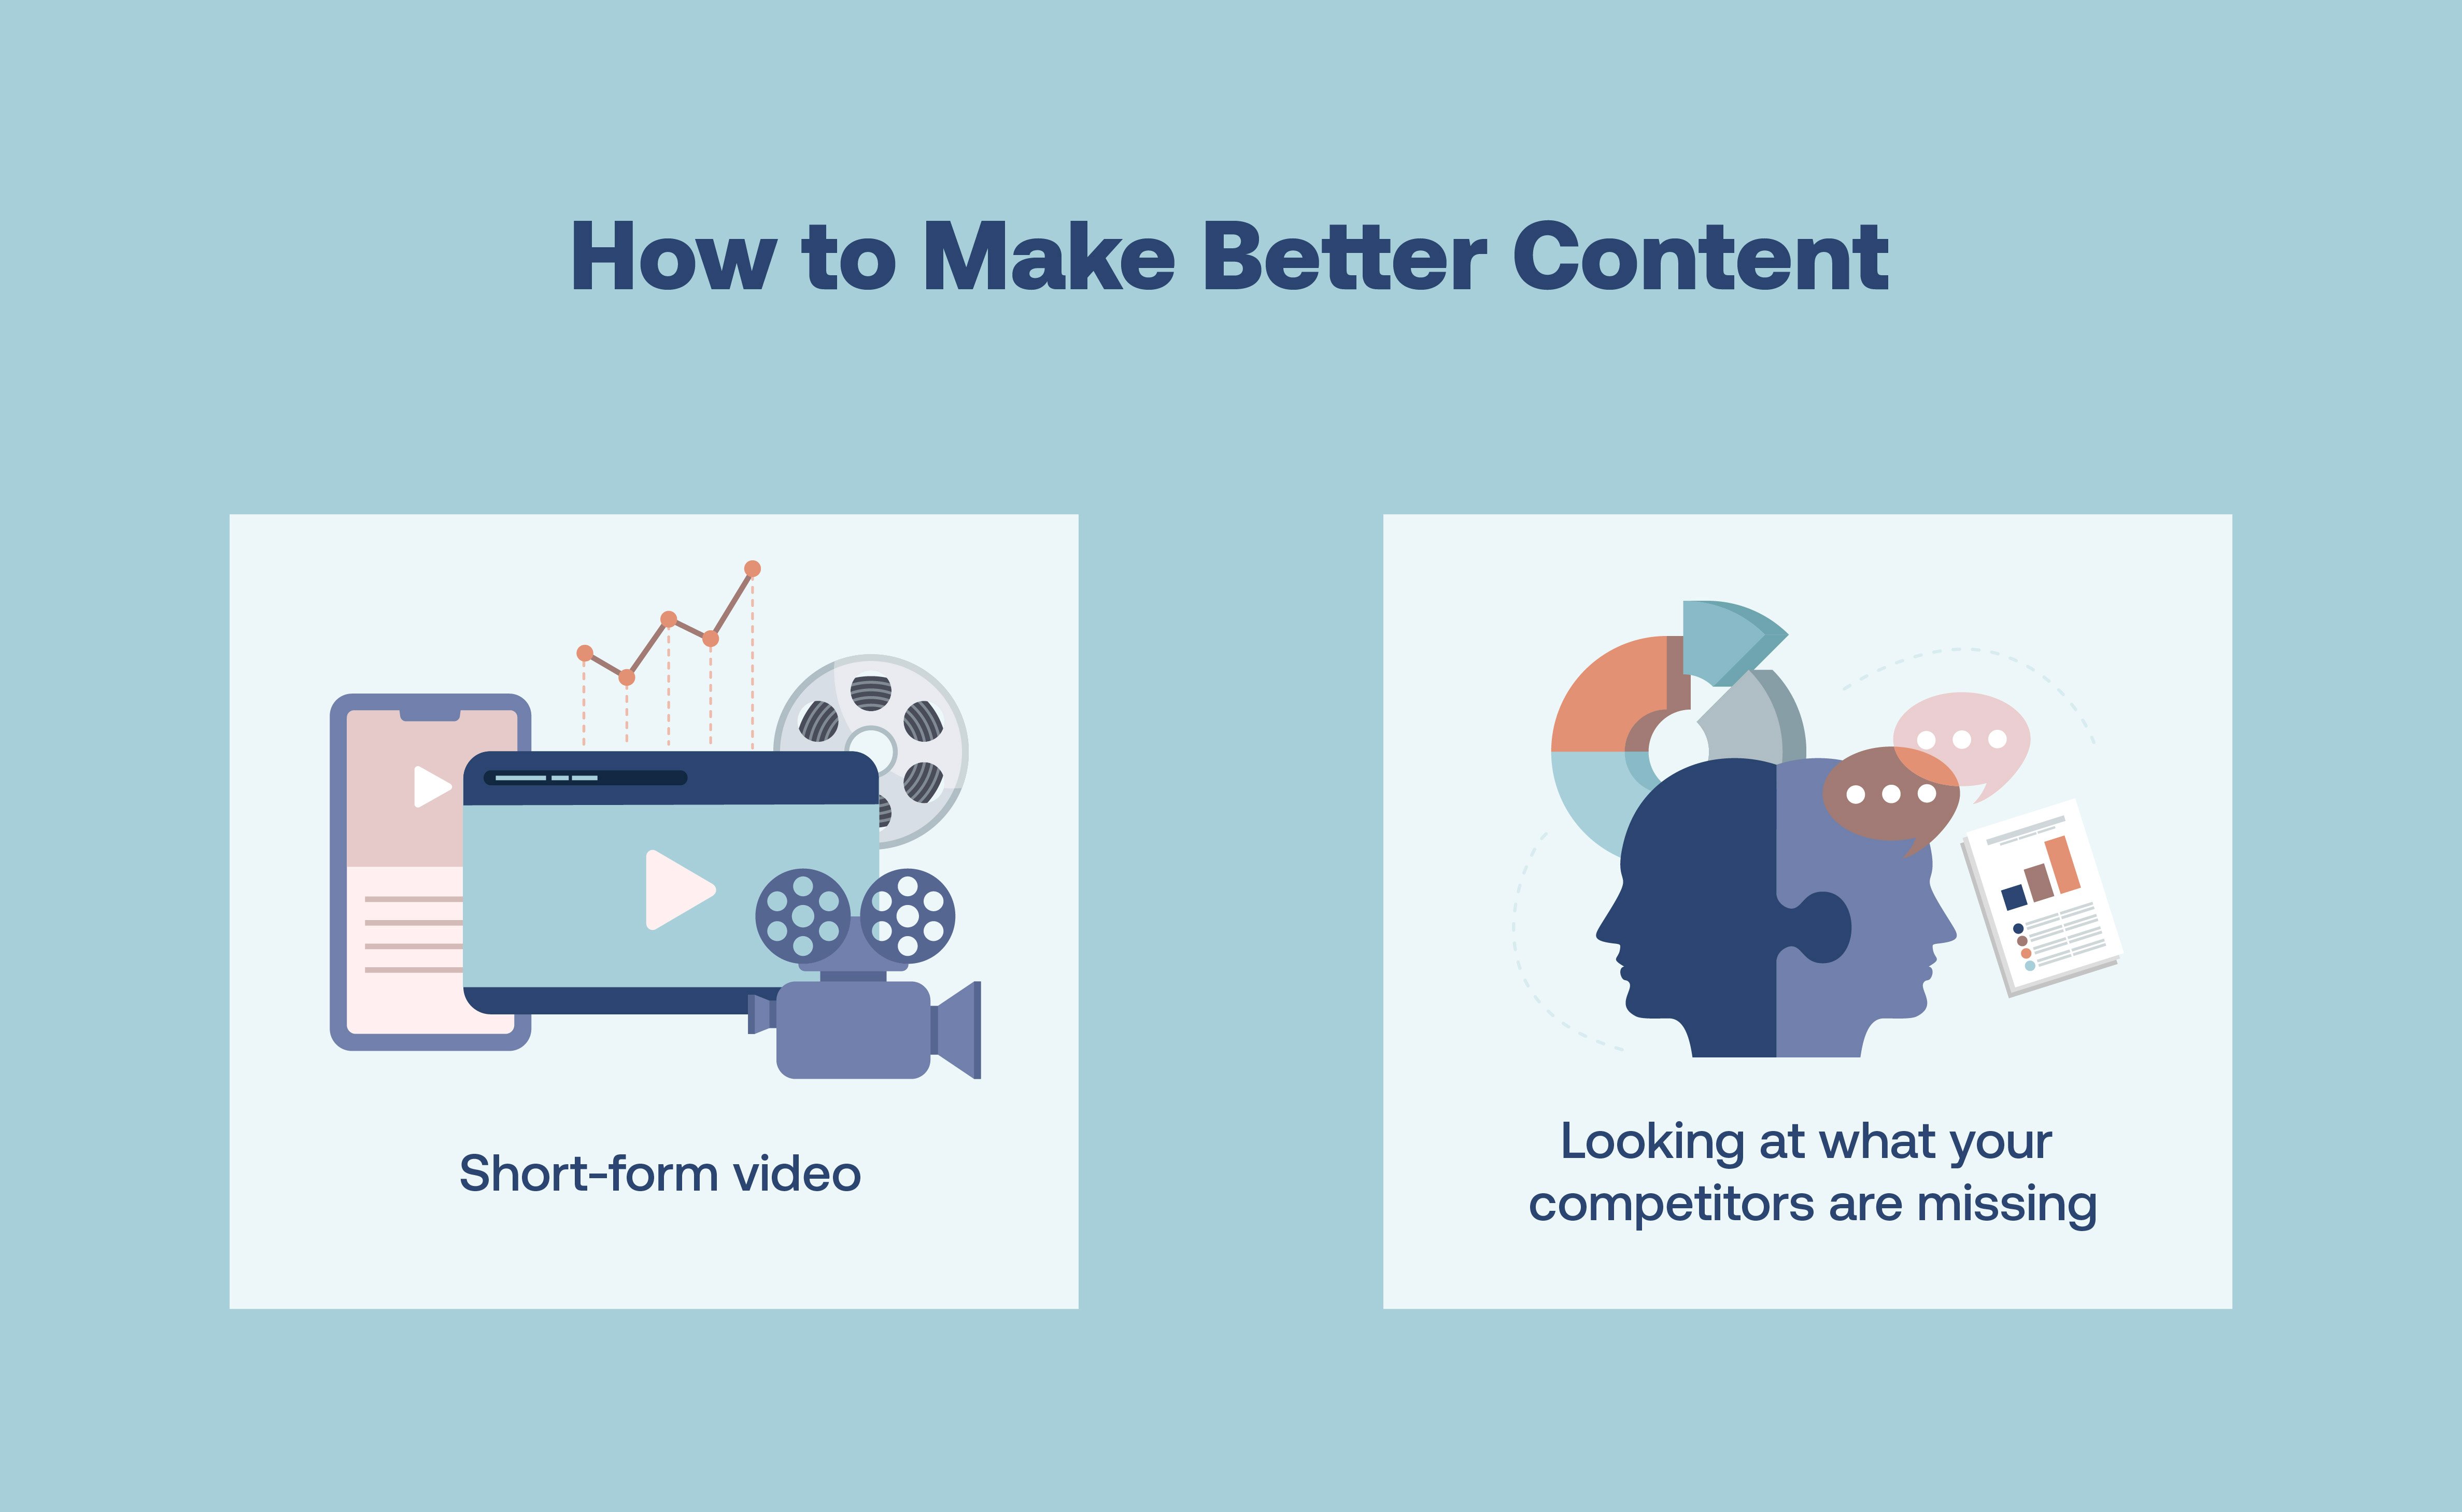 a winning strategy includes short form video and knowing what competitors are missing